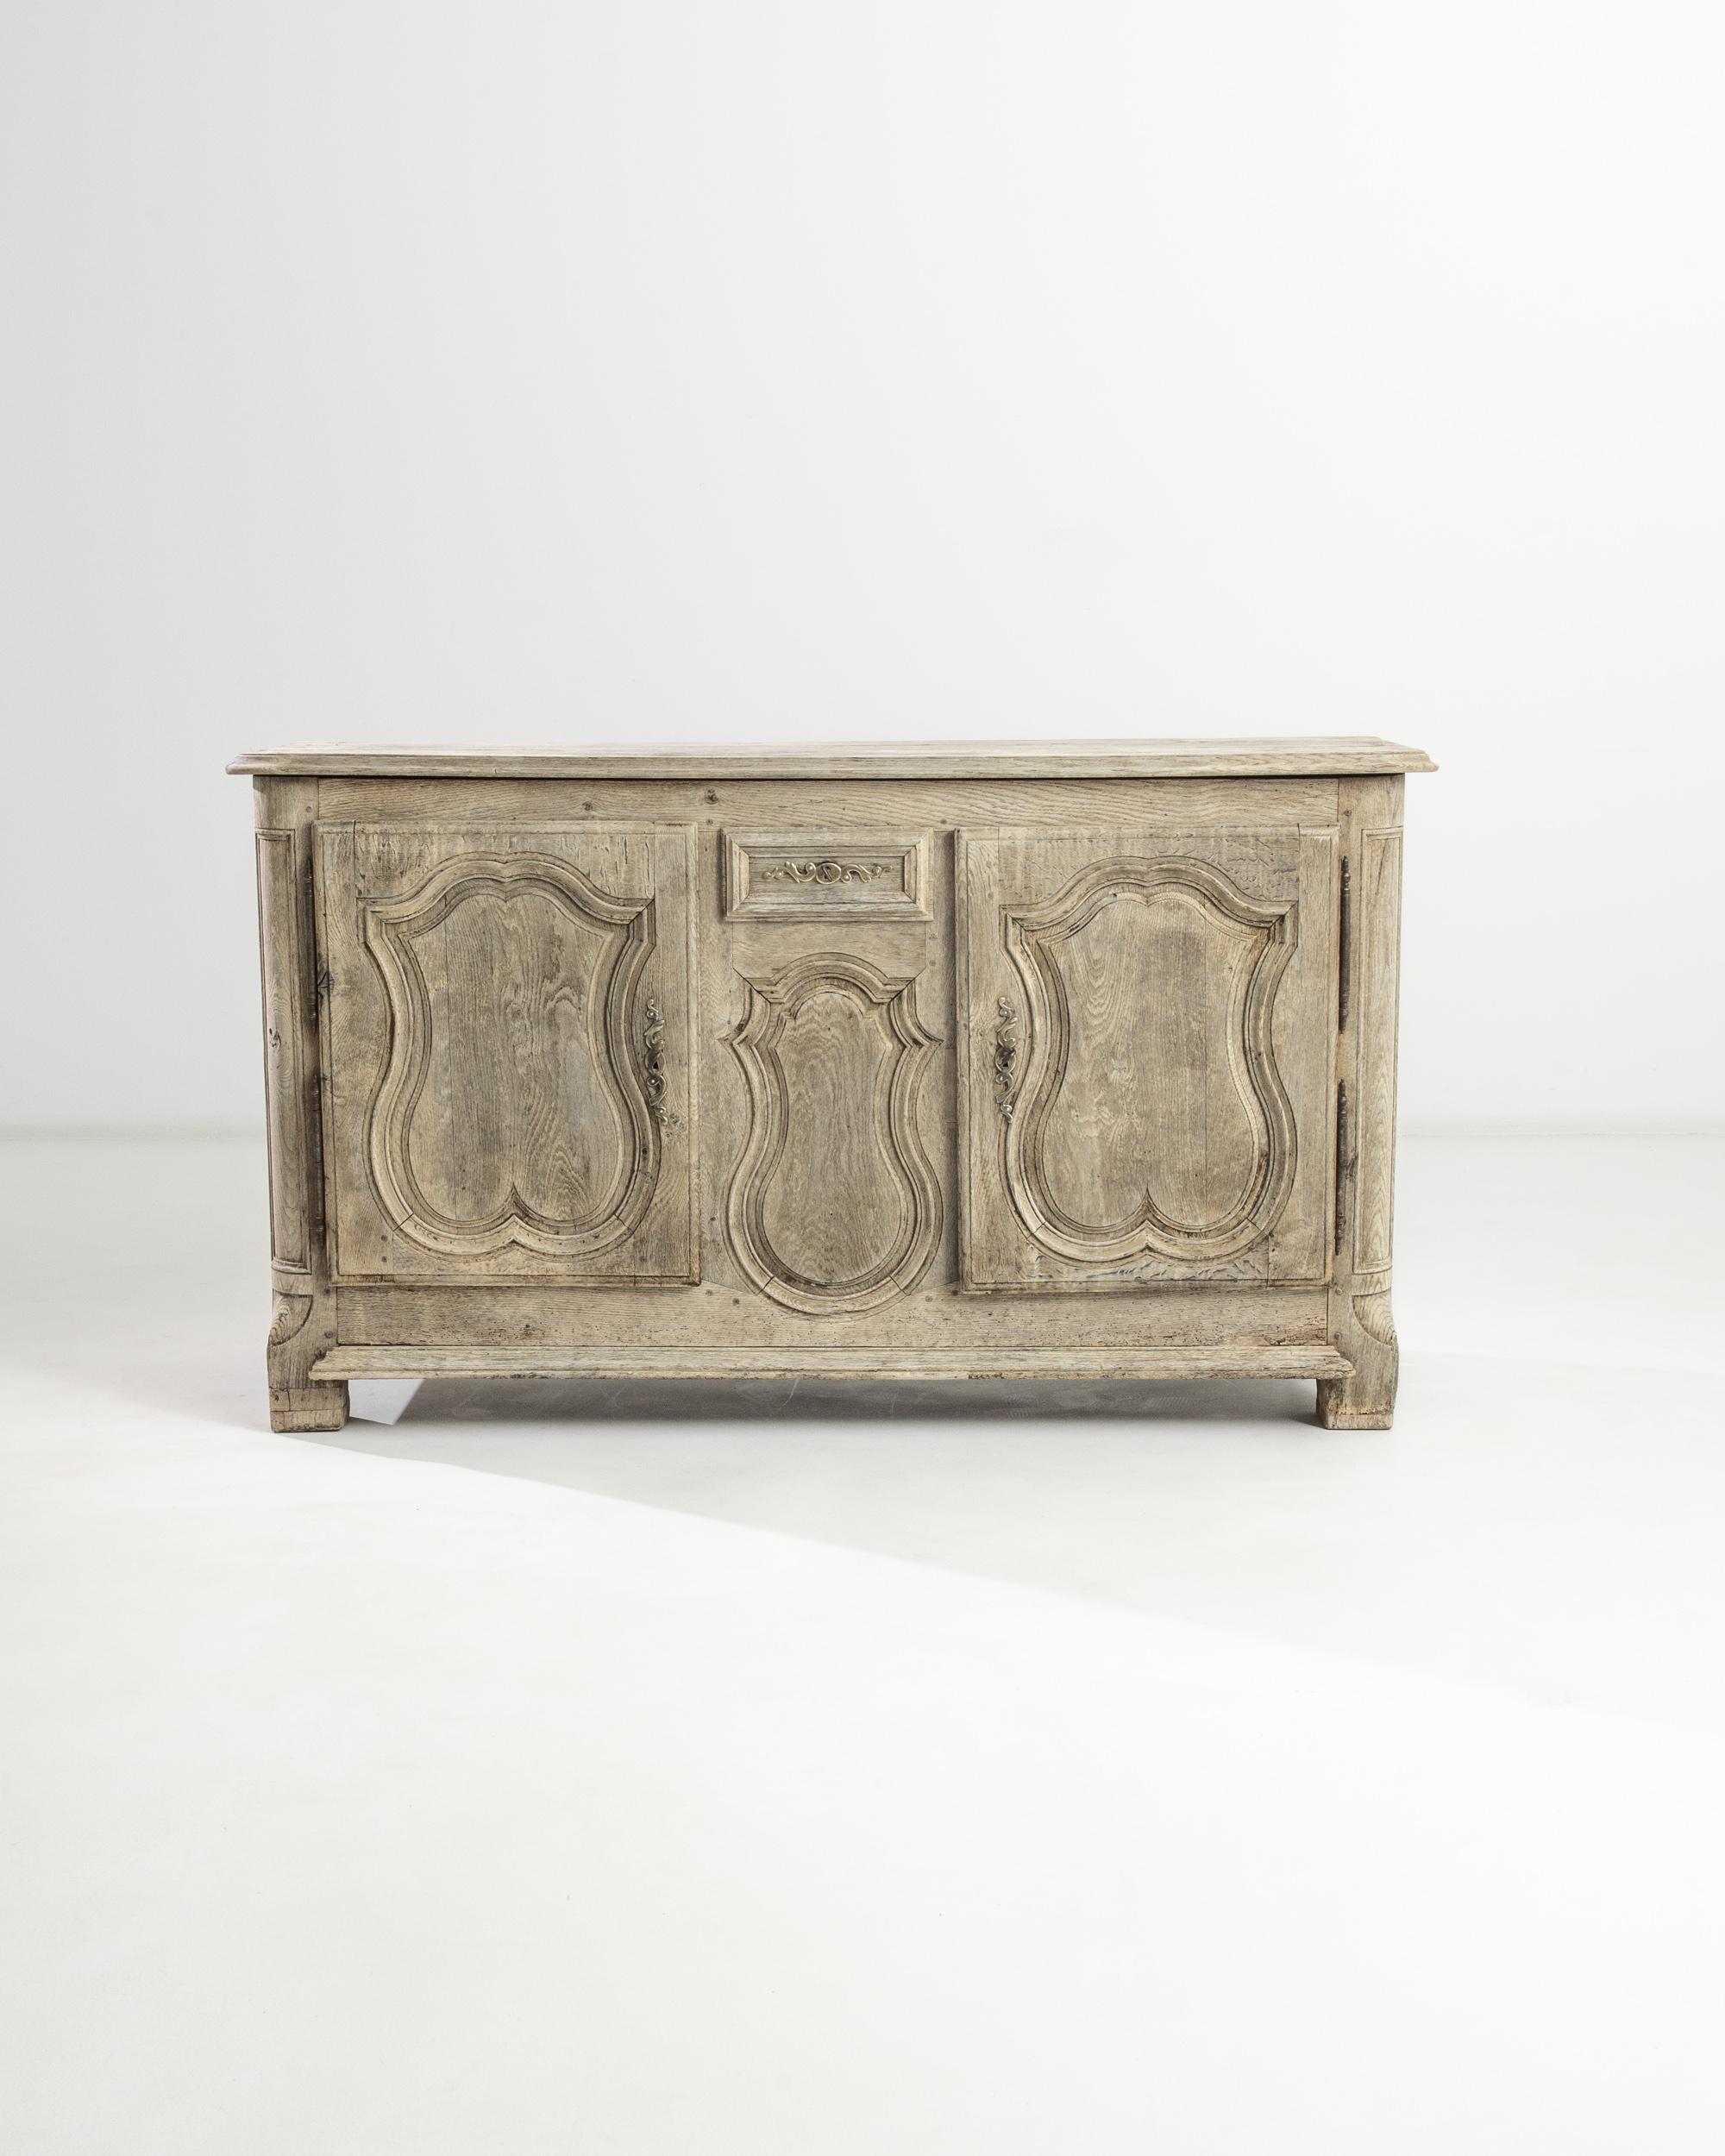 A bleached oak buffet from France, produced during the 19th Century. Bulbous forms etched in relief resemble kissing lips, creating a warm facade for this antique buffet. Featuring two locking cabinet doors and a locking, sliding drawer above a